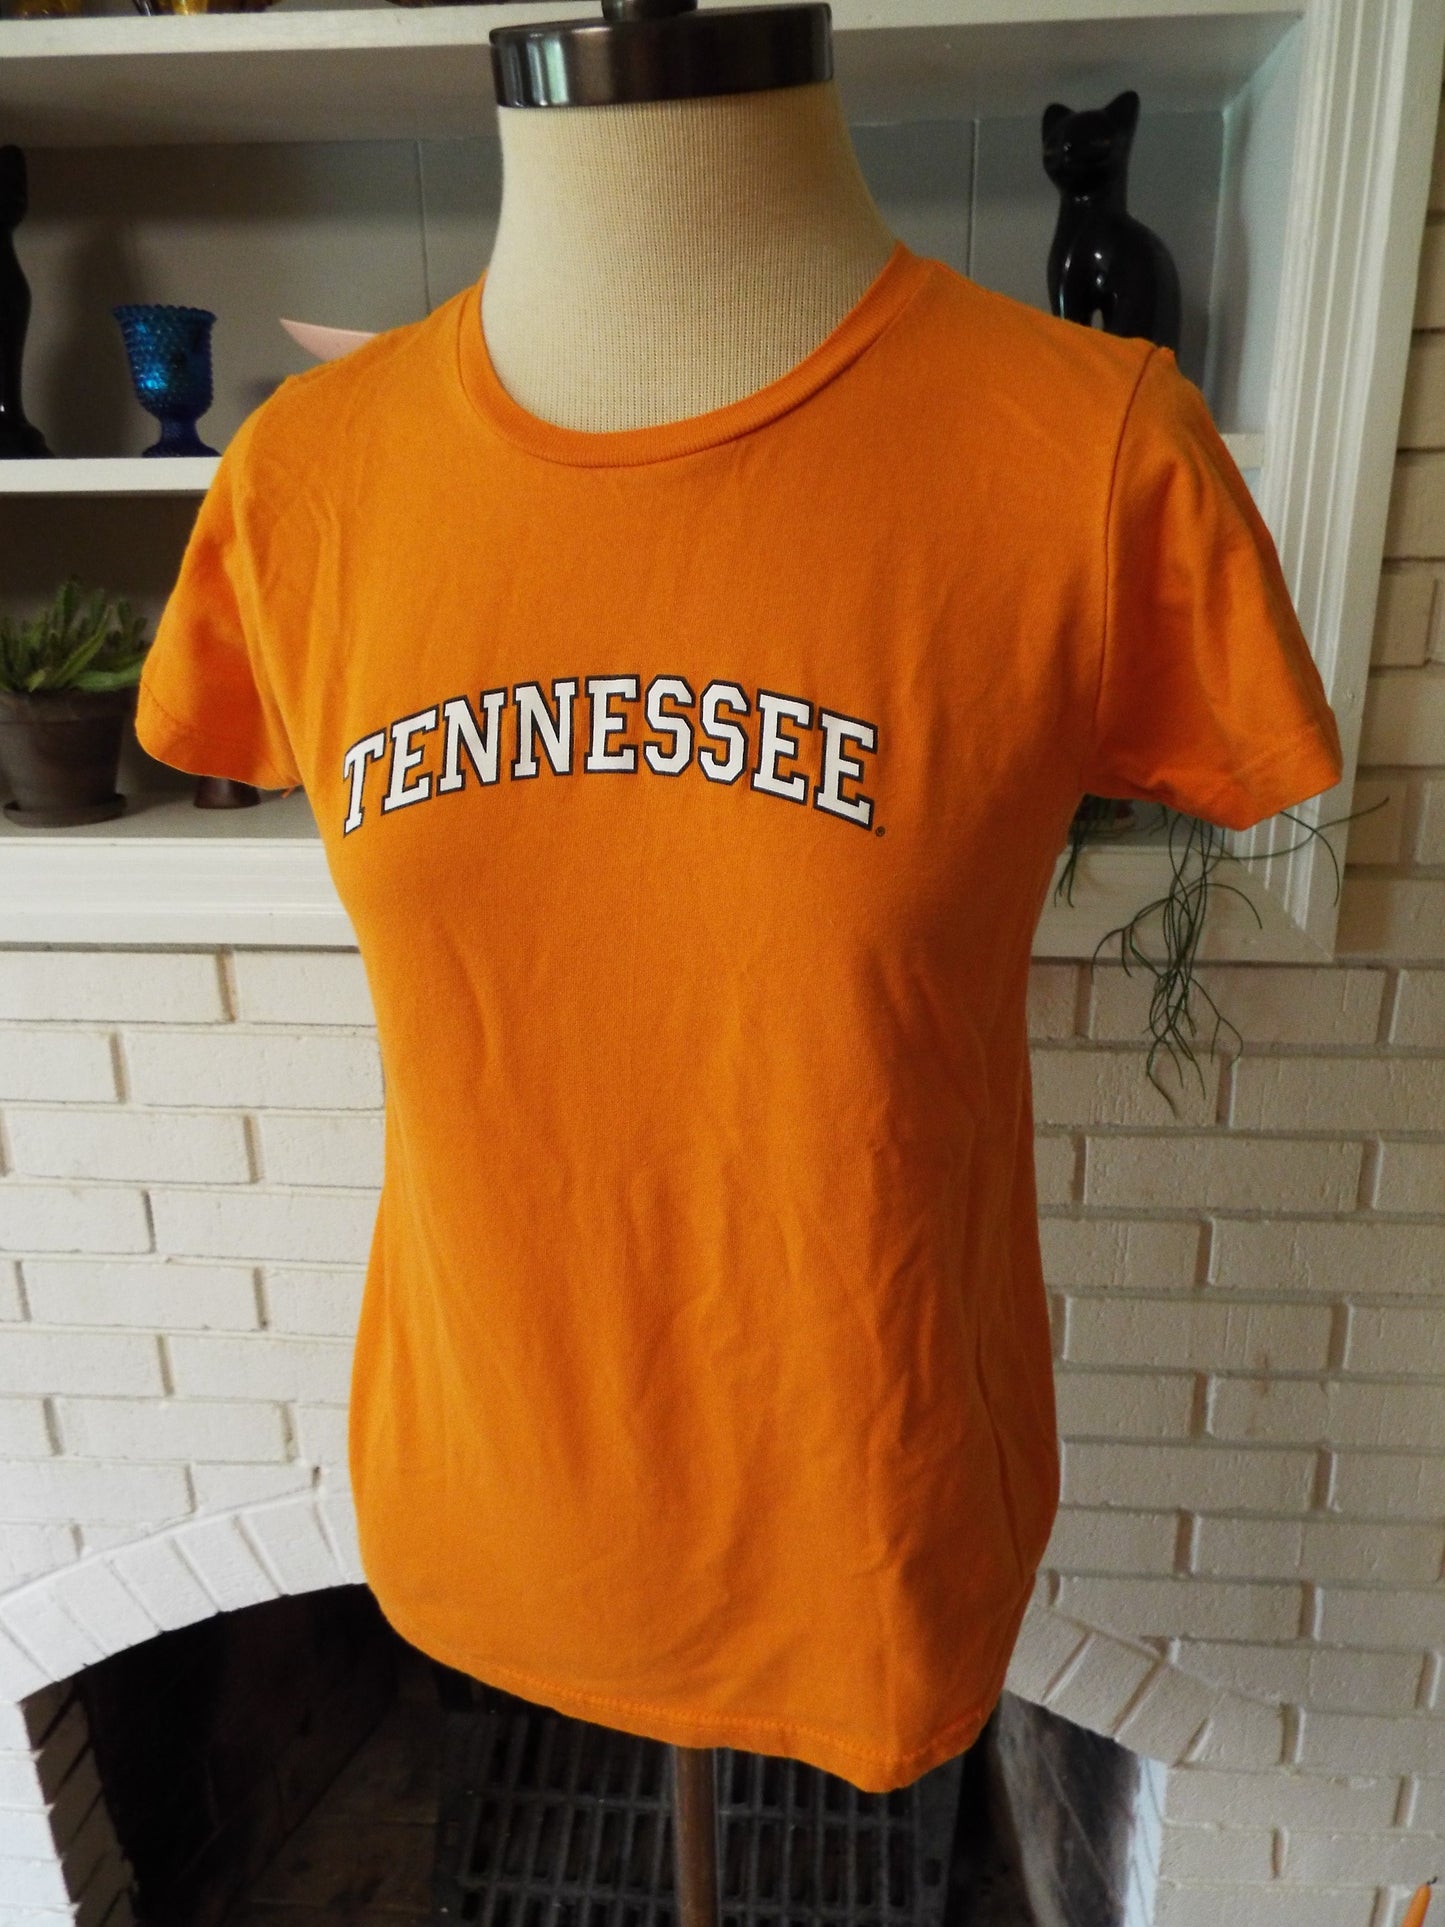 Vintage Tennessee T-shirt by the Cotton Exchange